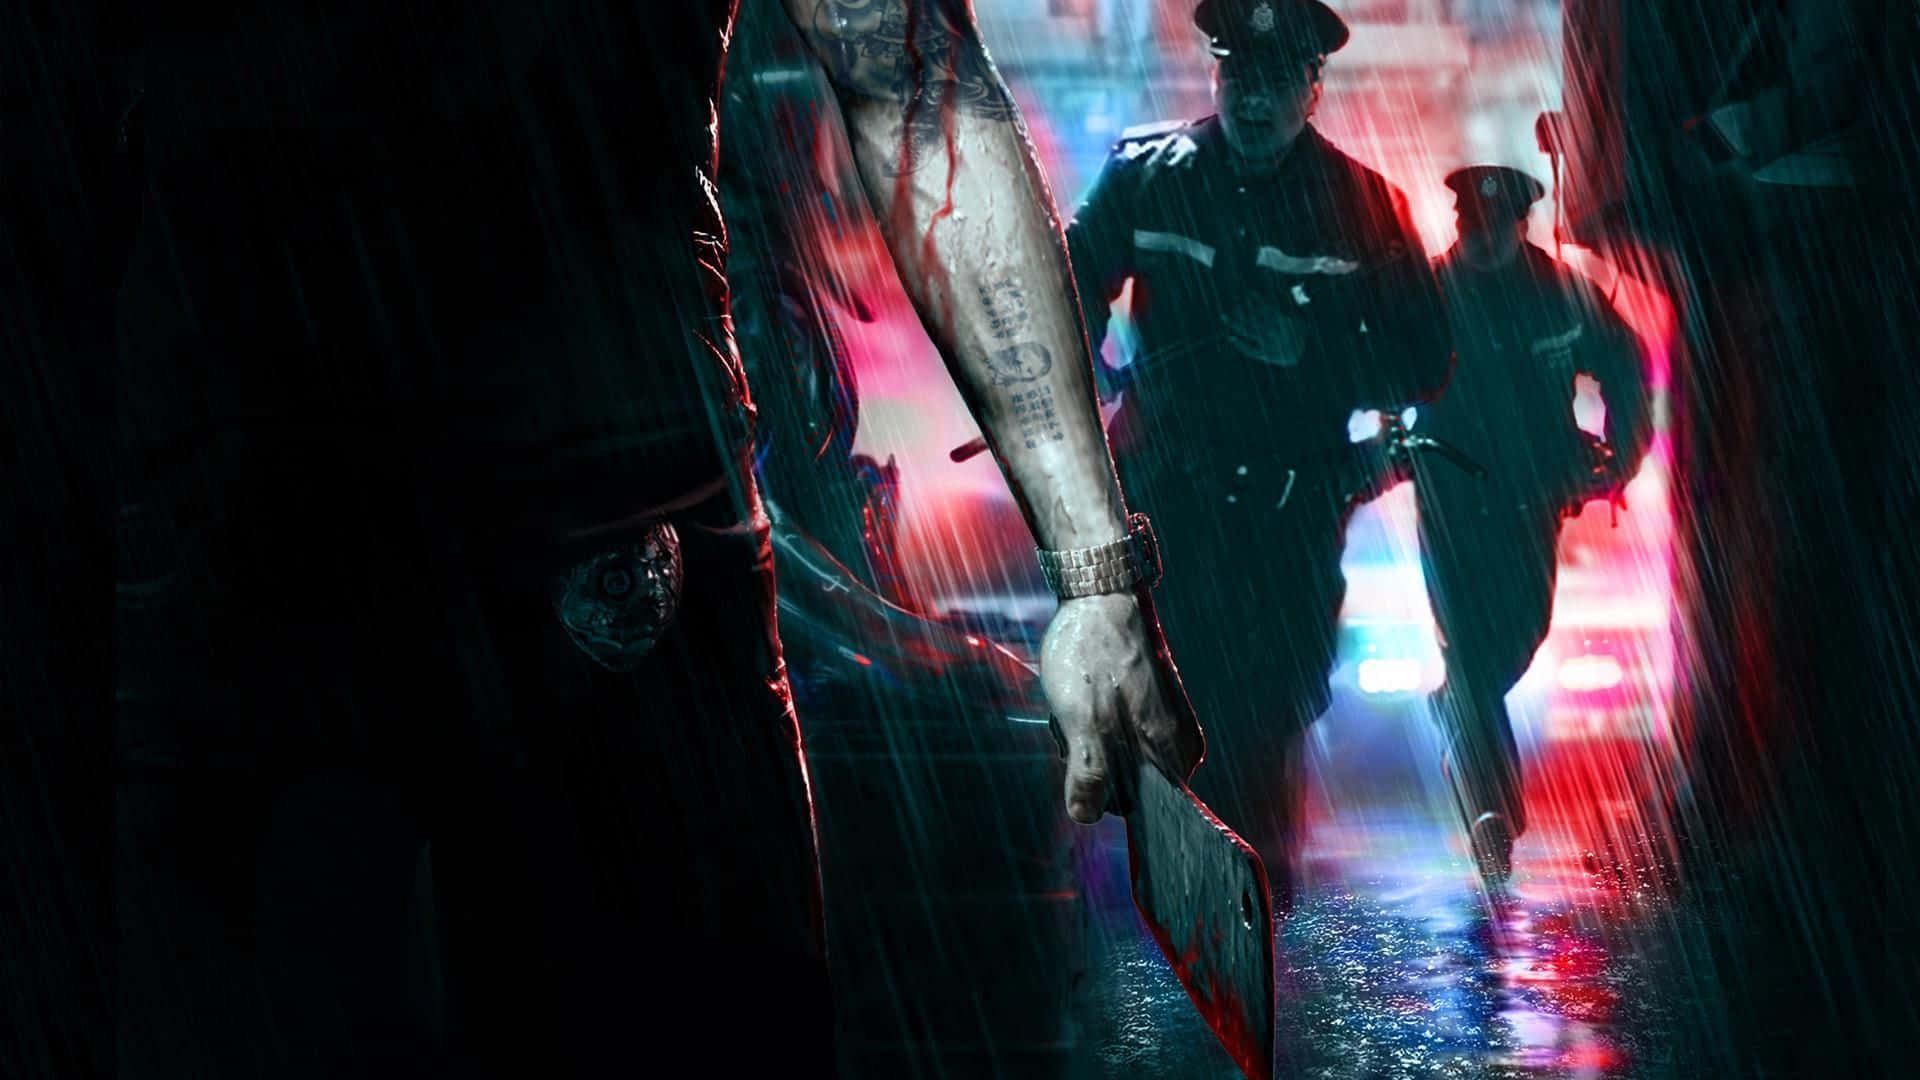 HD Sleeping Dogs Game Police Officers Background